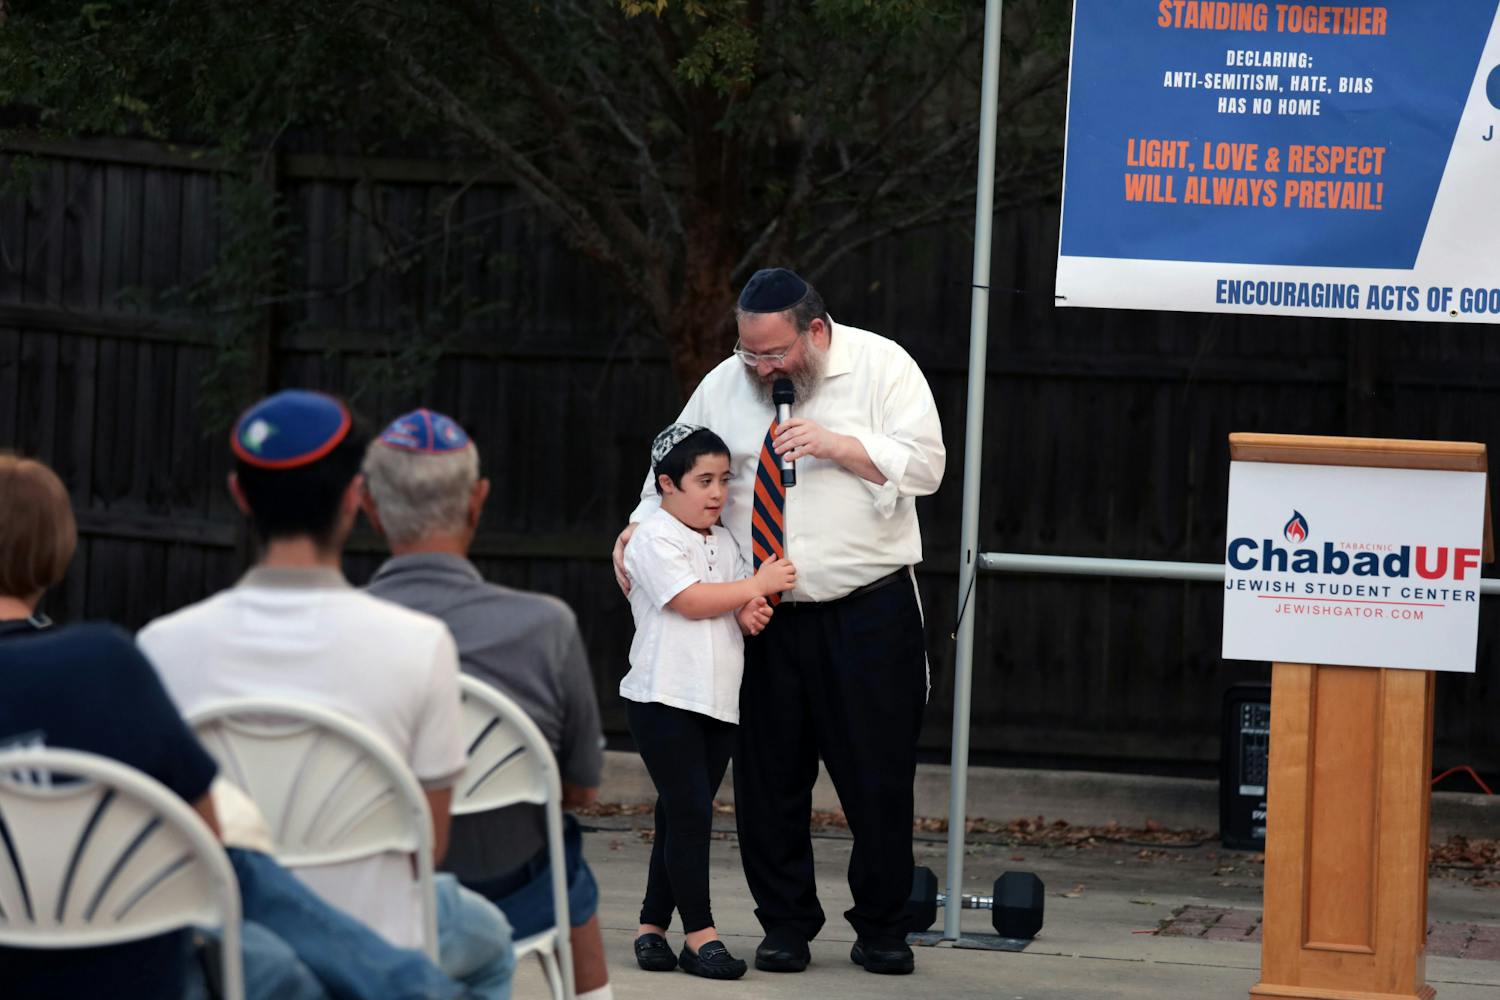 Rabbi Berl Goldman and his son Boruch stand in front of attendees at the Solidarity and Unity Rally held at Chabad UF Jewish Student and Community Center Friday Nov. 4, 2022.